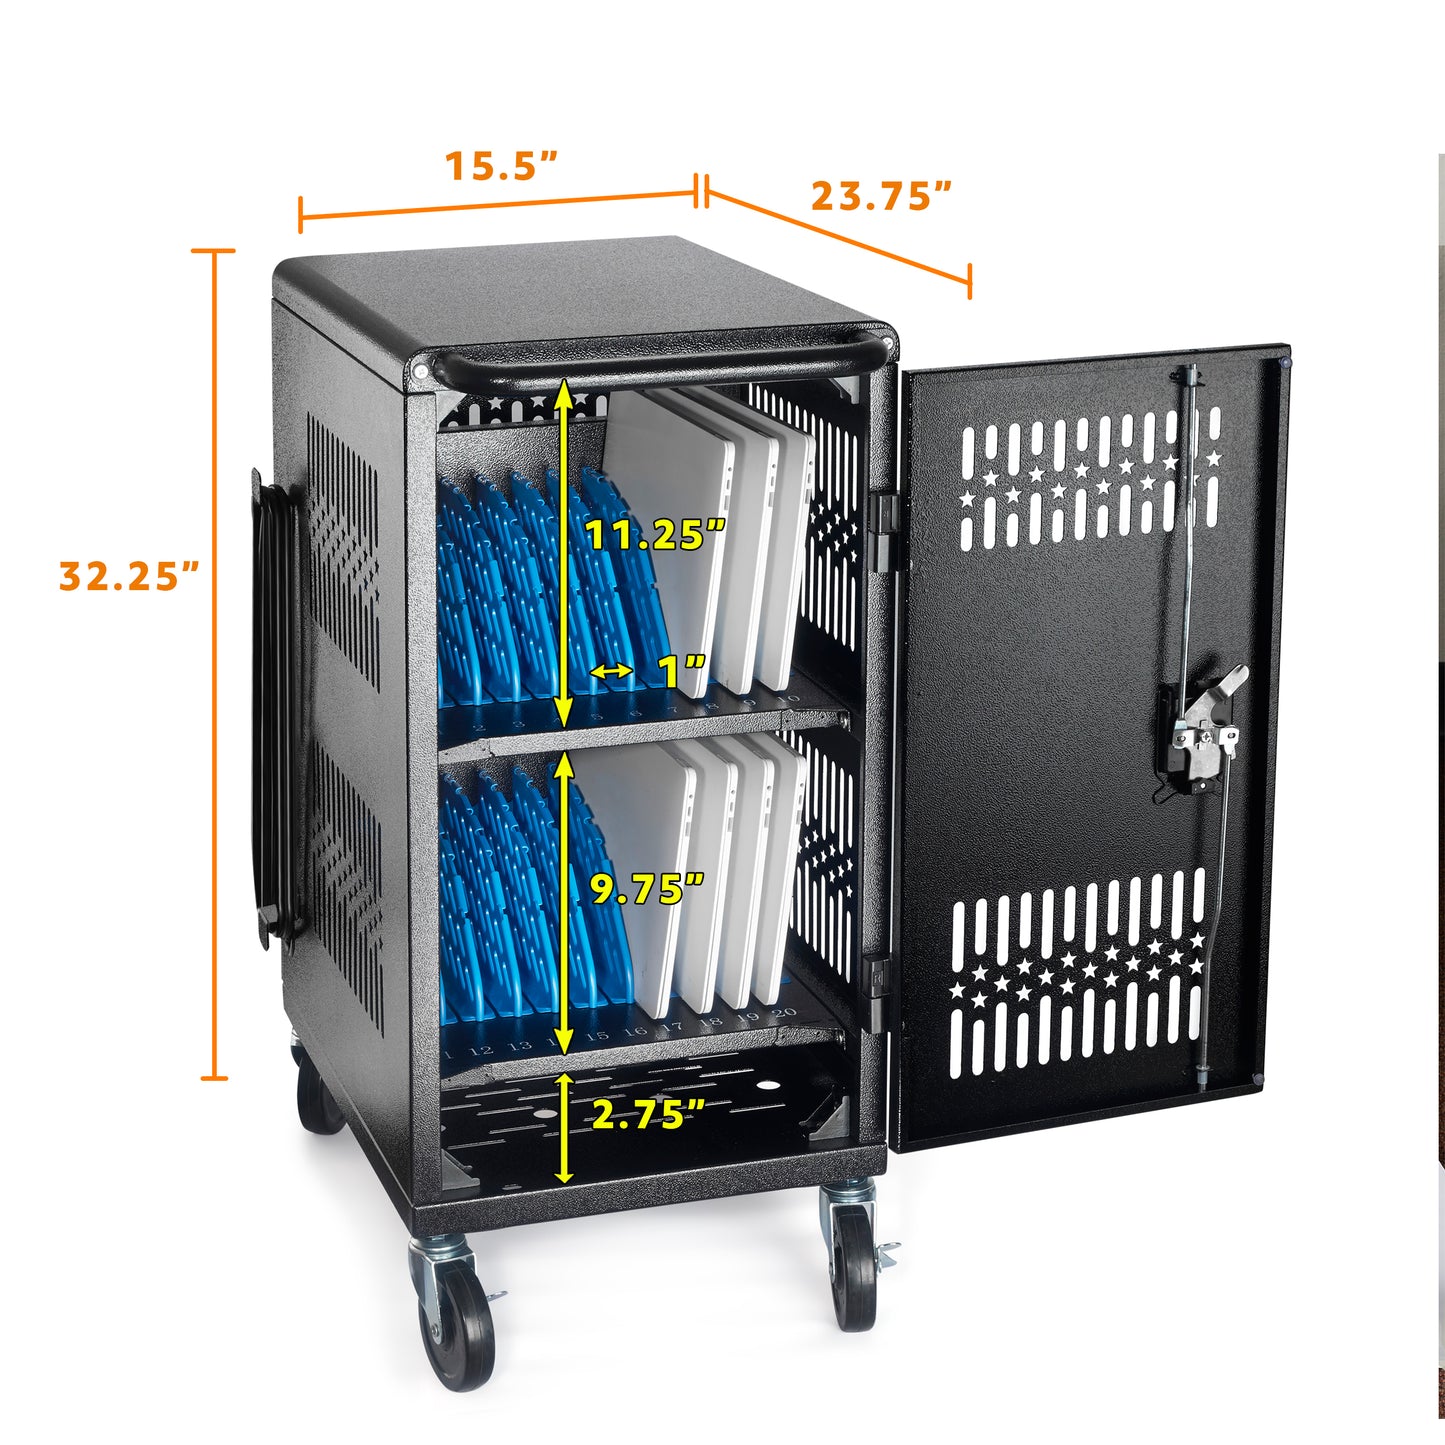 M-C20-H - Pre-Assembled American Style Heavy-Duty 20 Bay Laptop Charging Cart for School Classroom Storing and Charing 20 Chromebook, Laptop, and Tablet